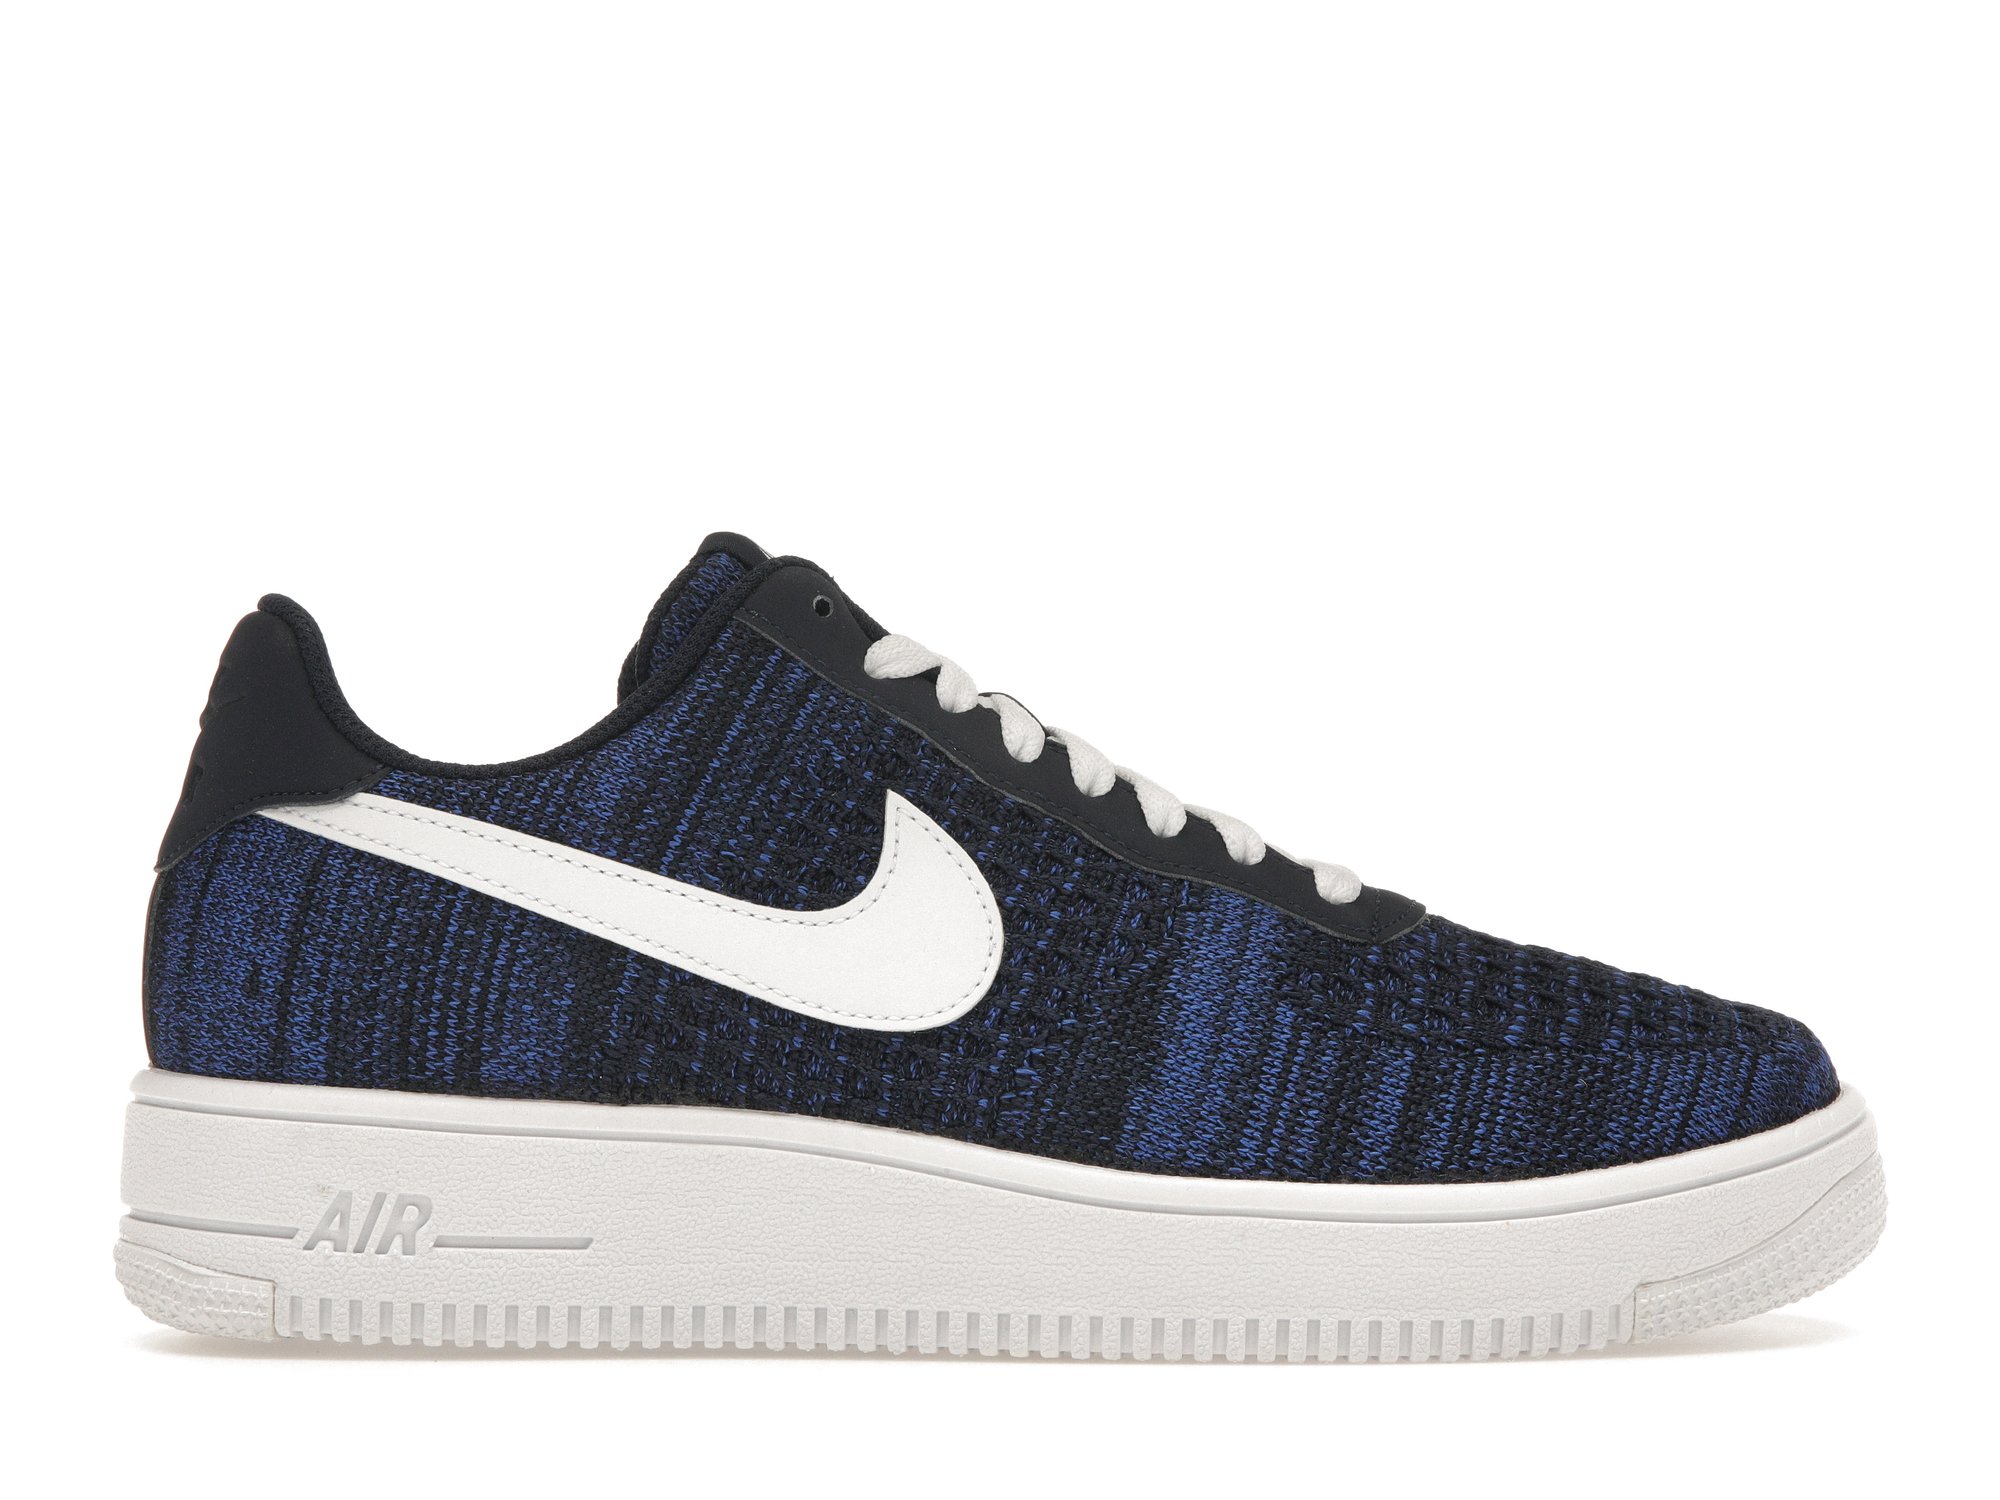 Nike Air Force 1 Flyknit 2 College Navy